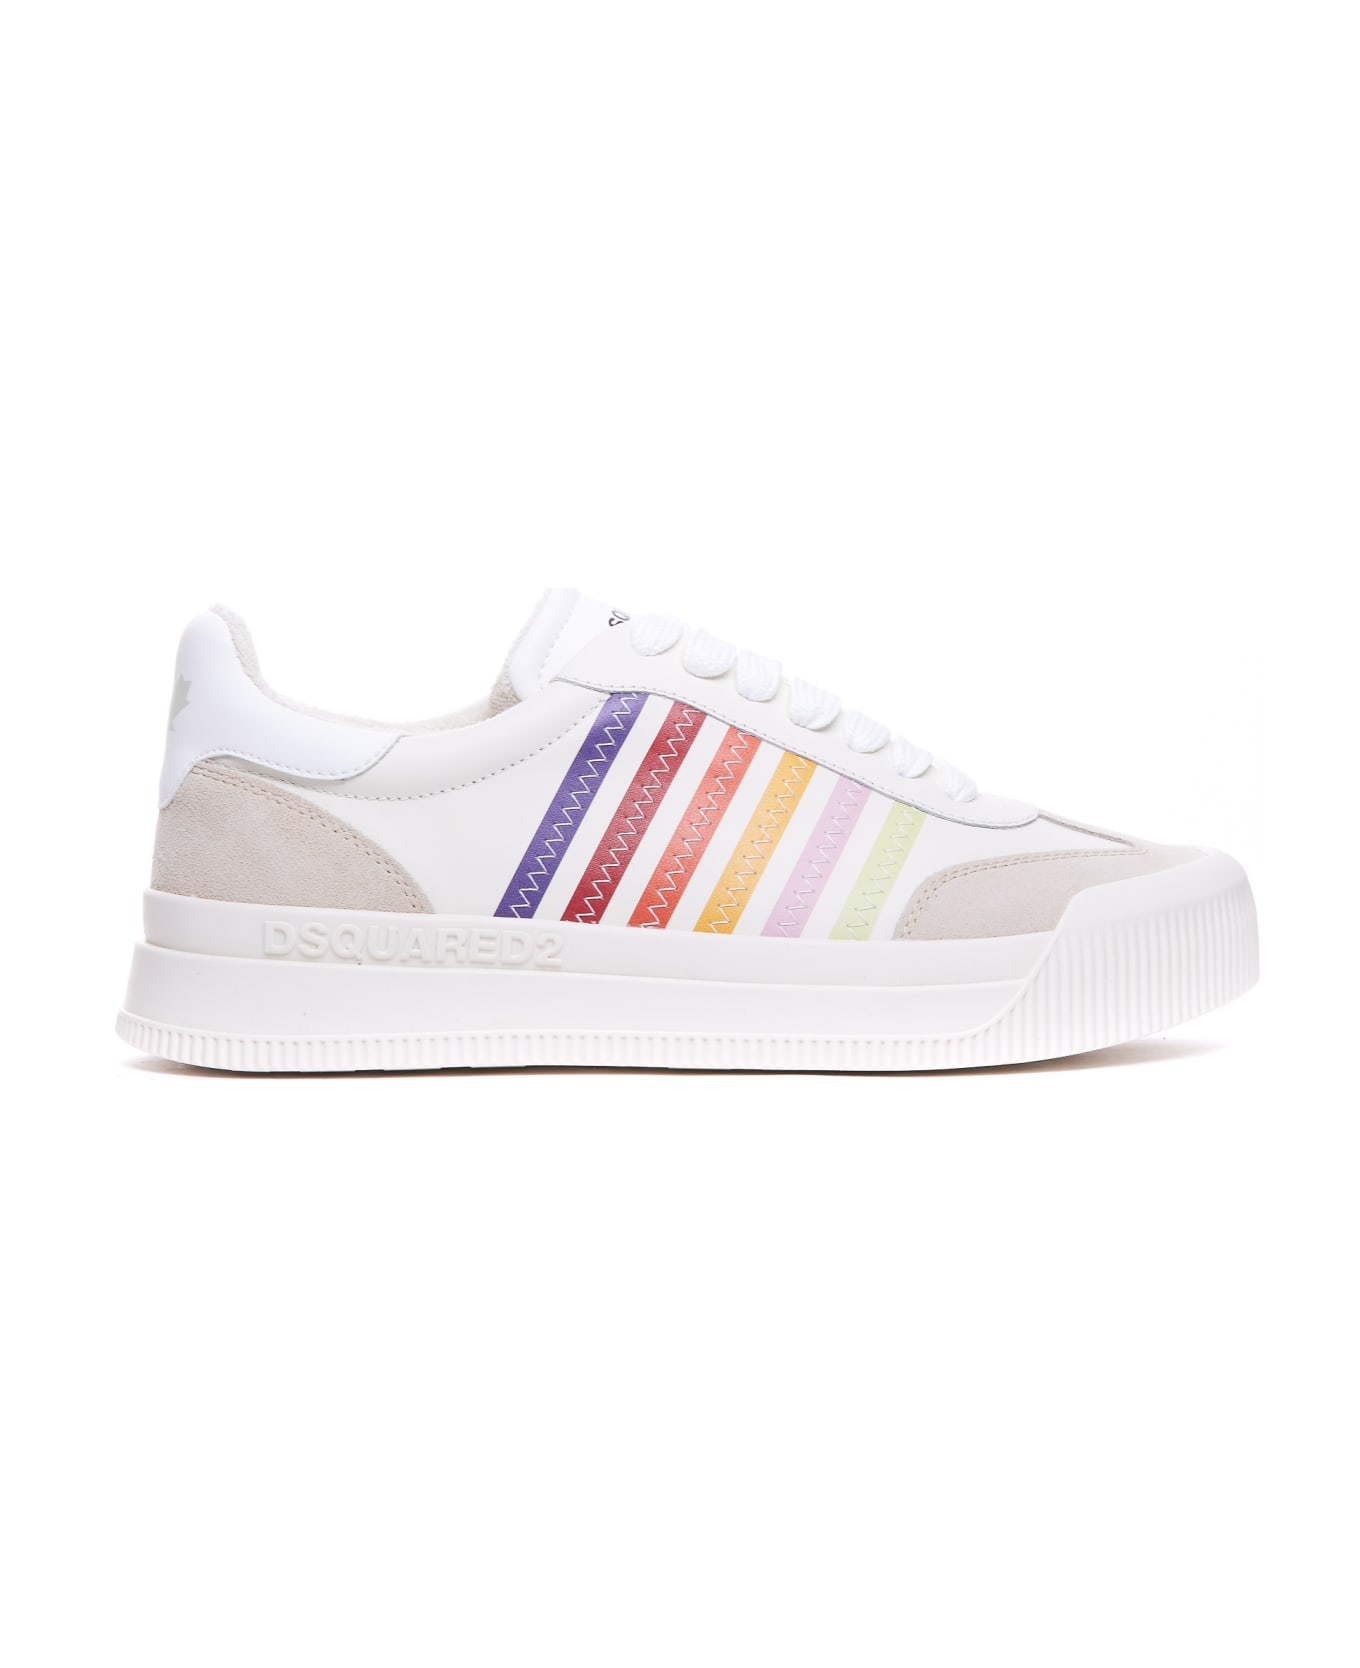 Dsquared2 New Jersey Lace-up Low Top Sneakers - Beige/multicolore スニーカー